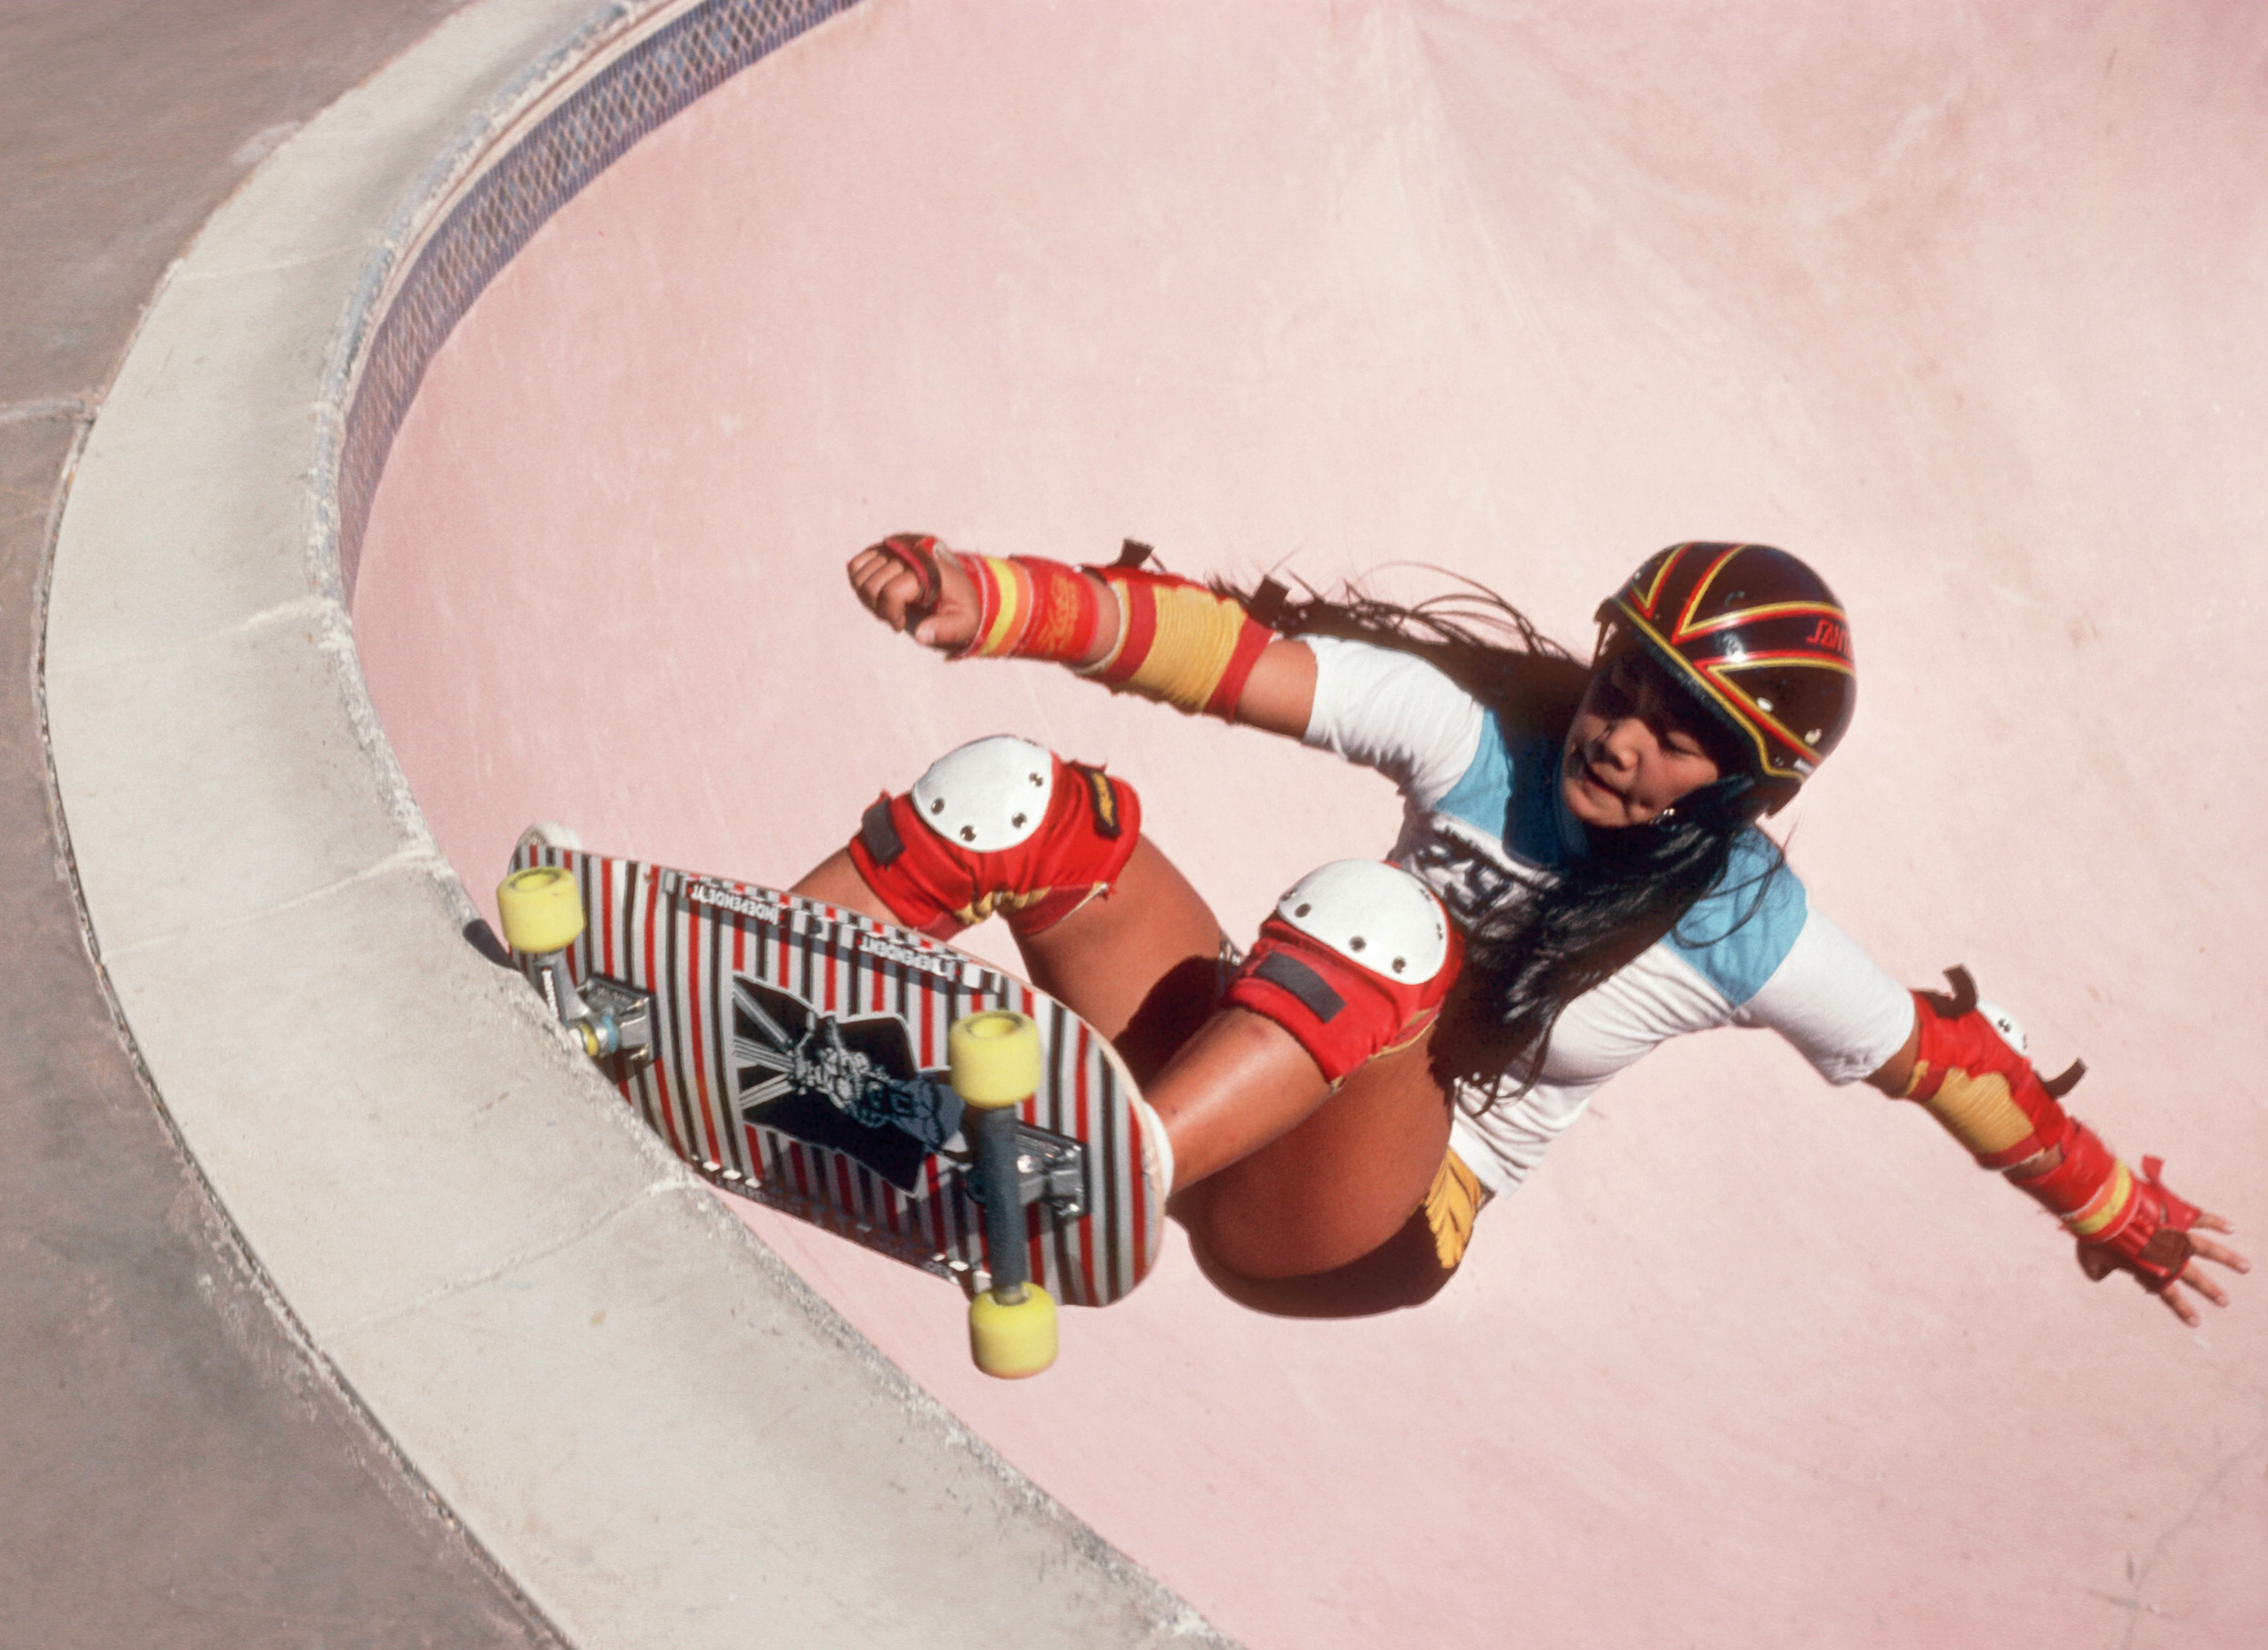 A young woman skateboarder with helmet and knee pads skates a ramp in an old photo.